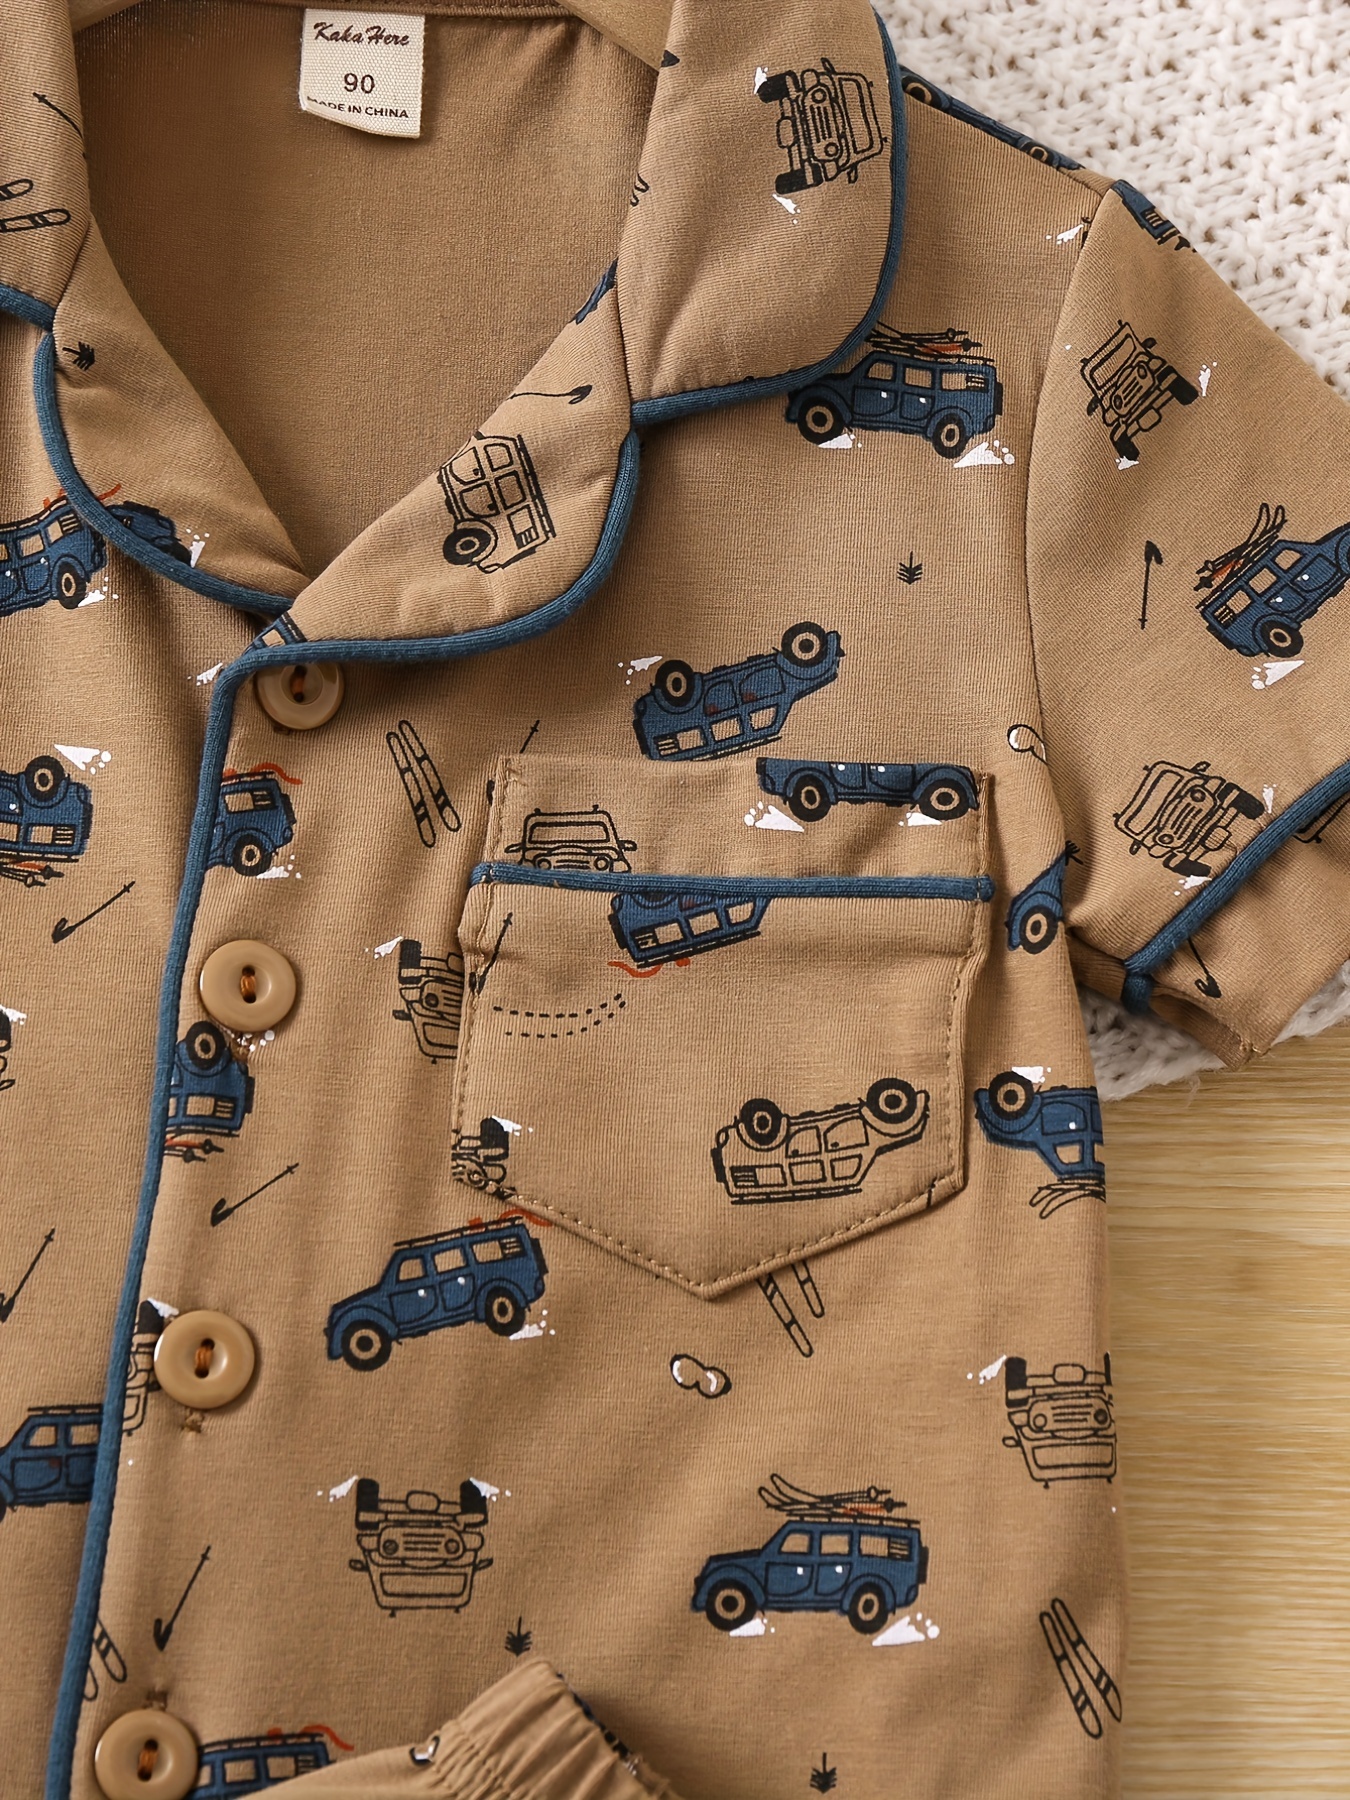 shop cheap pjs for kids and women